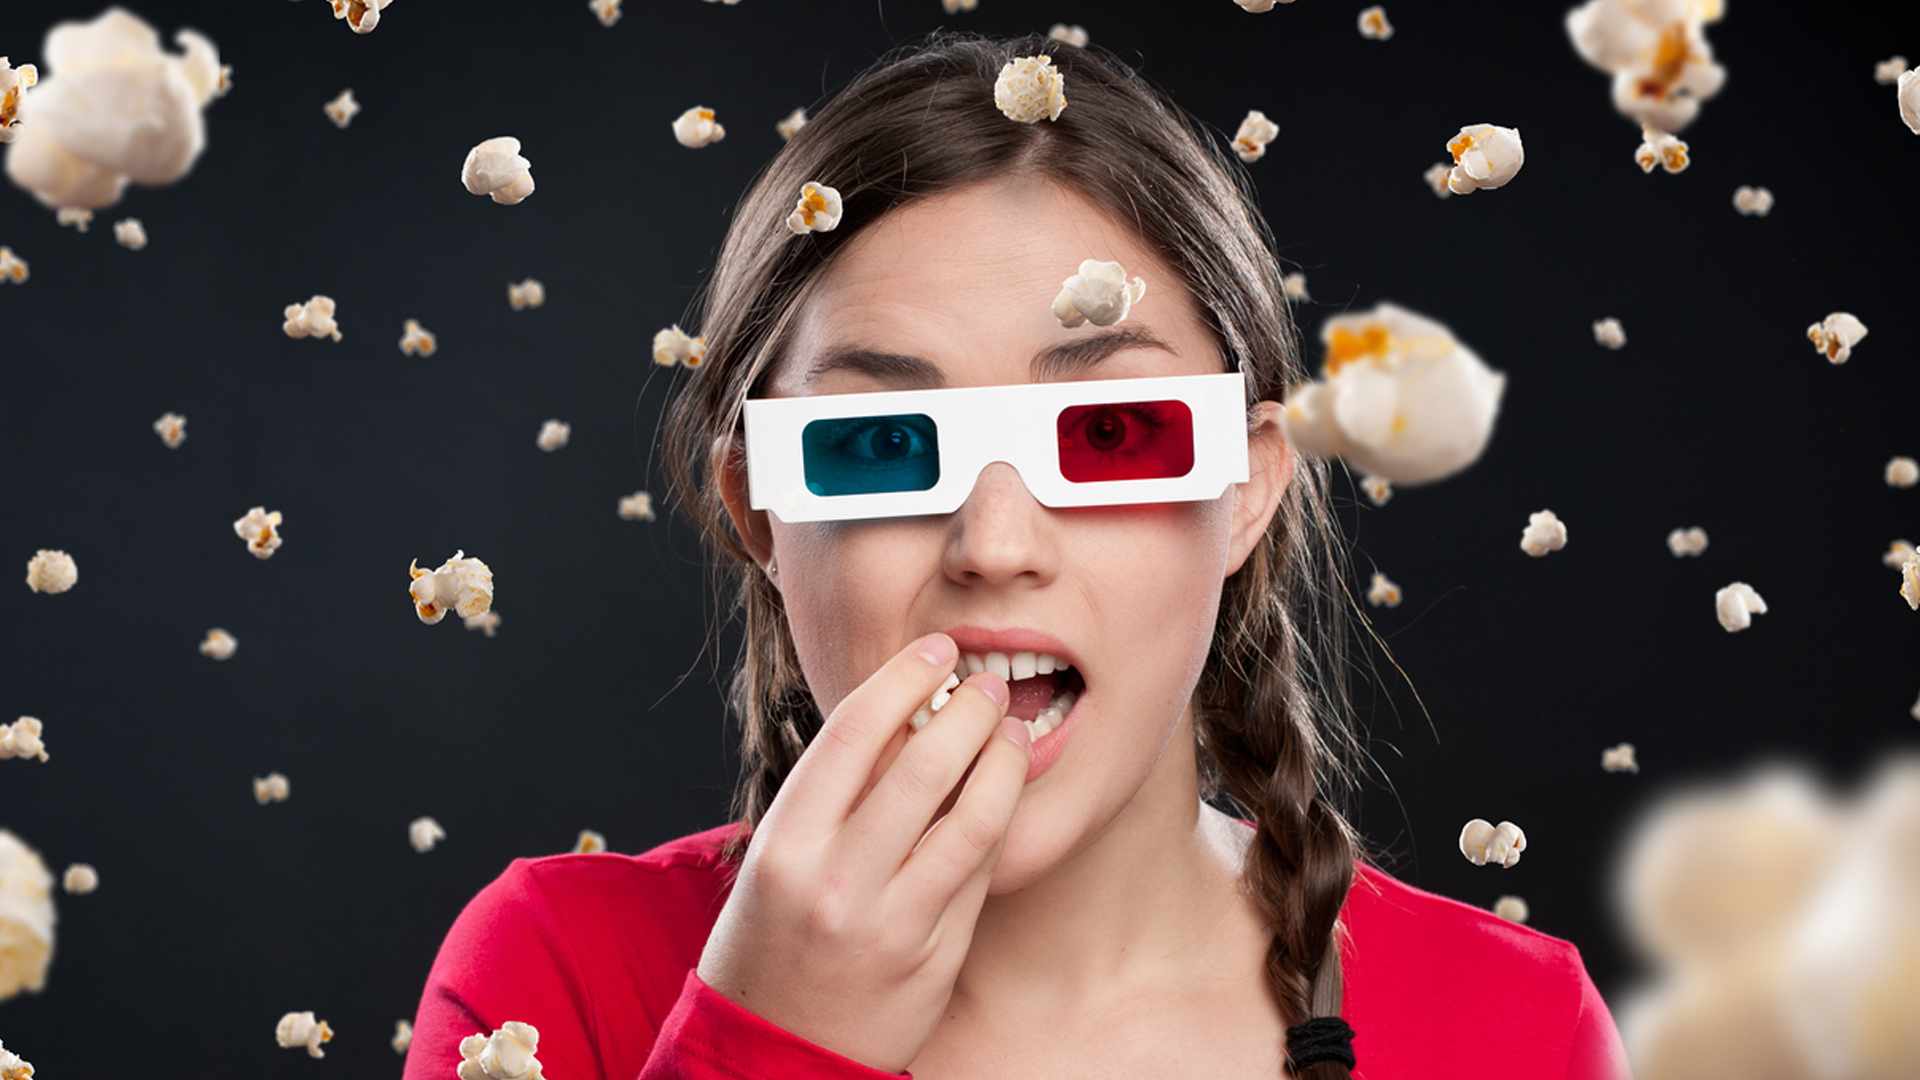 A person eating popcorn while wearing old-fashioned 3D glasses 